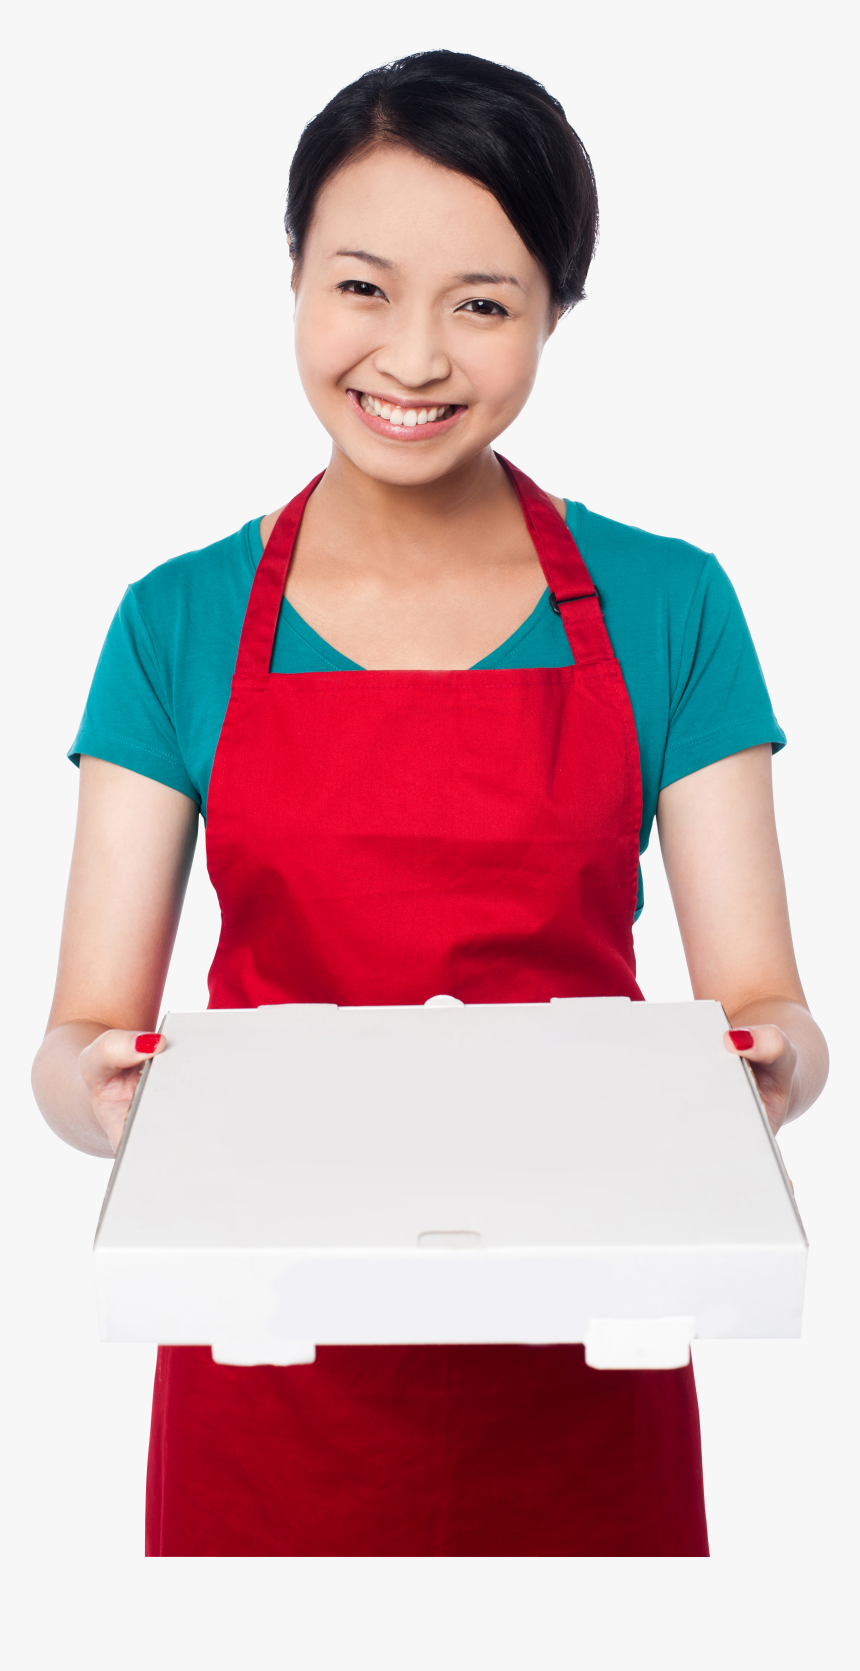 Women Holding Box - Women In Kitchen Png, Transparent Png, Free Download